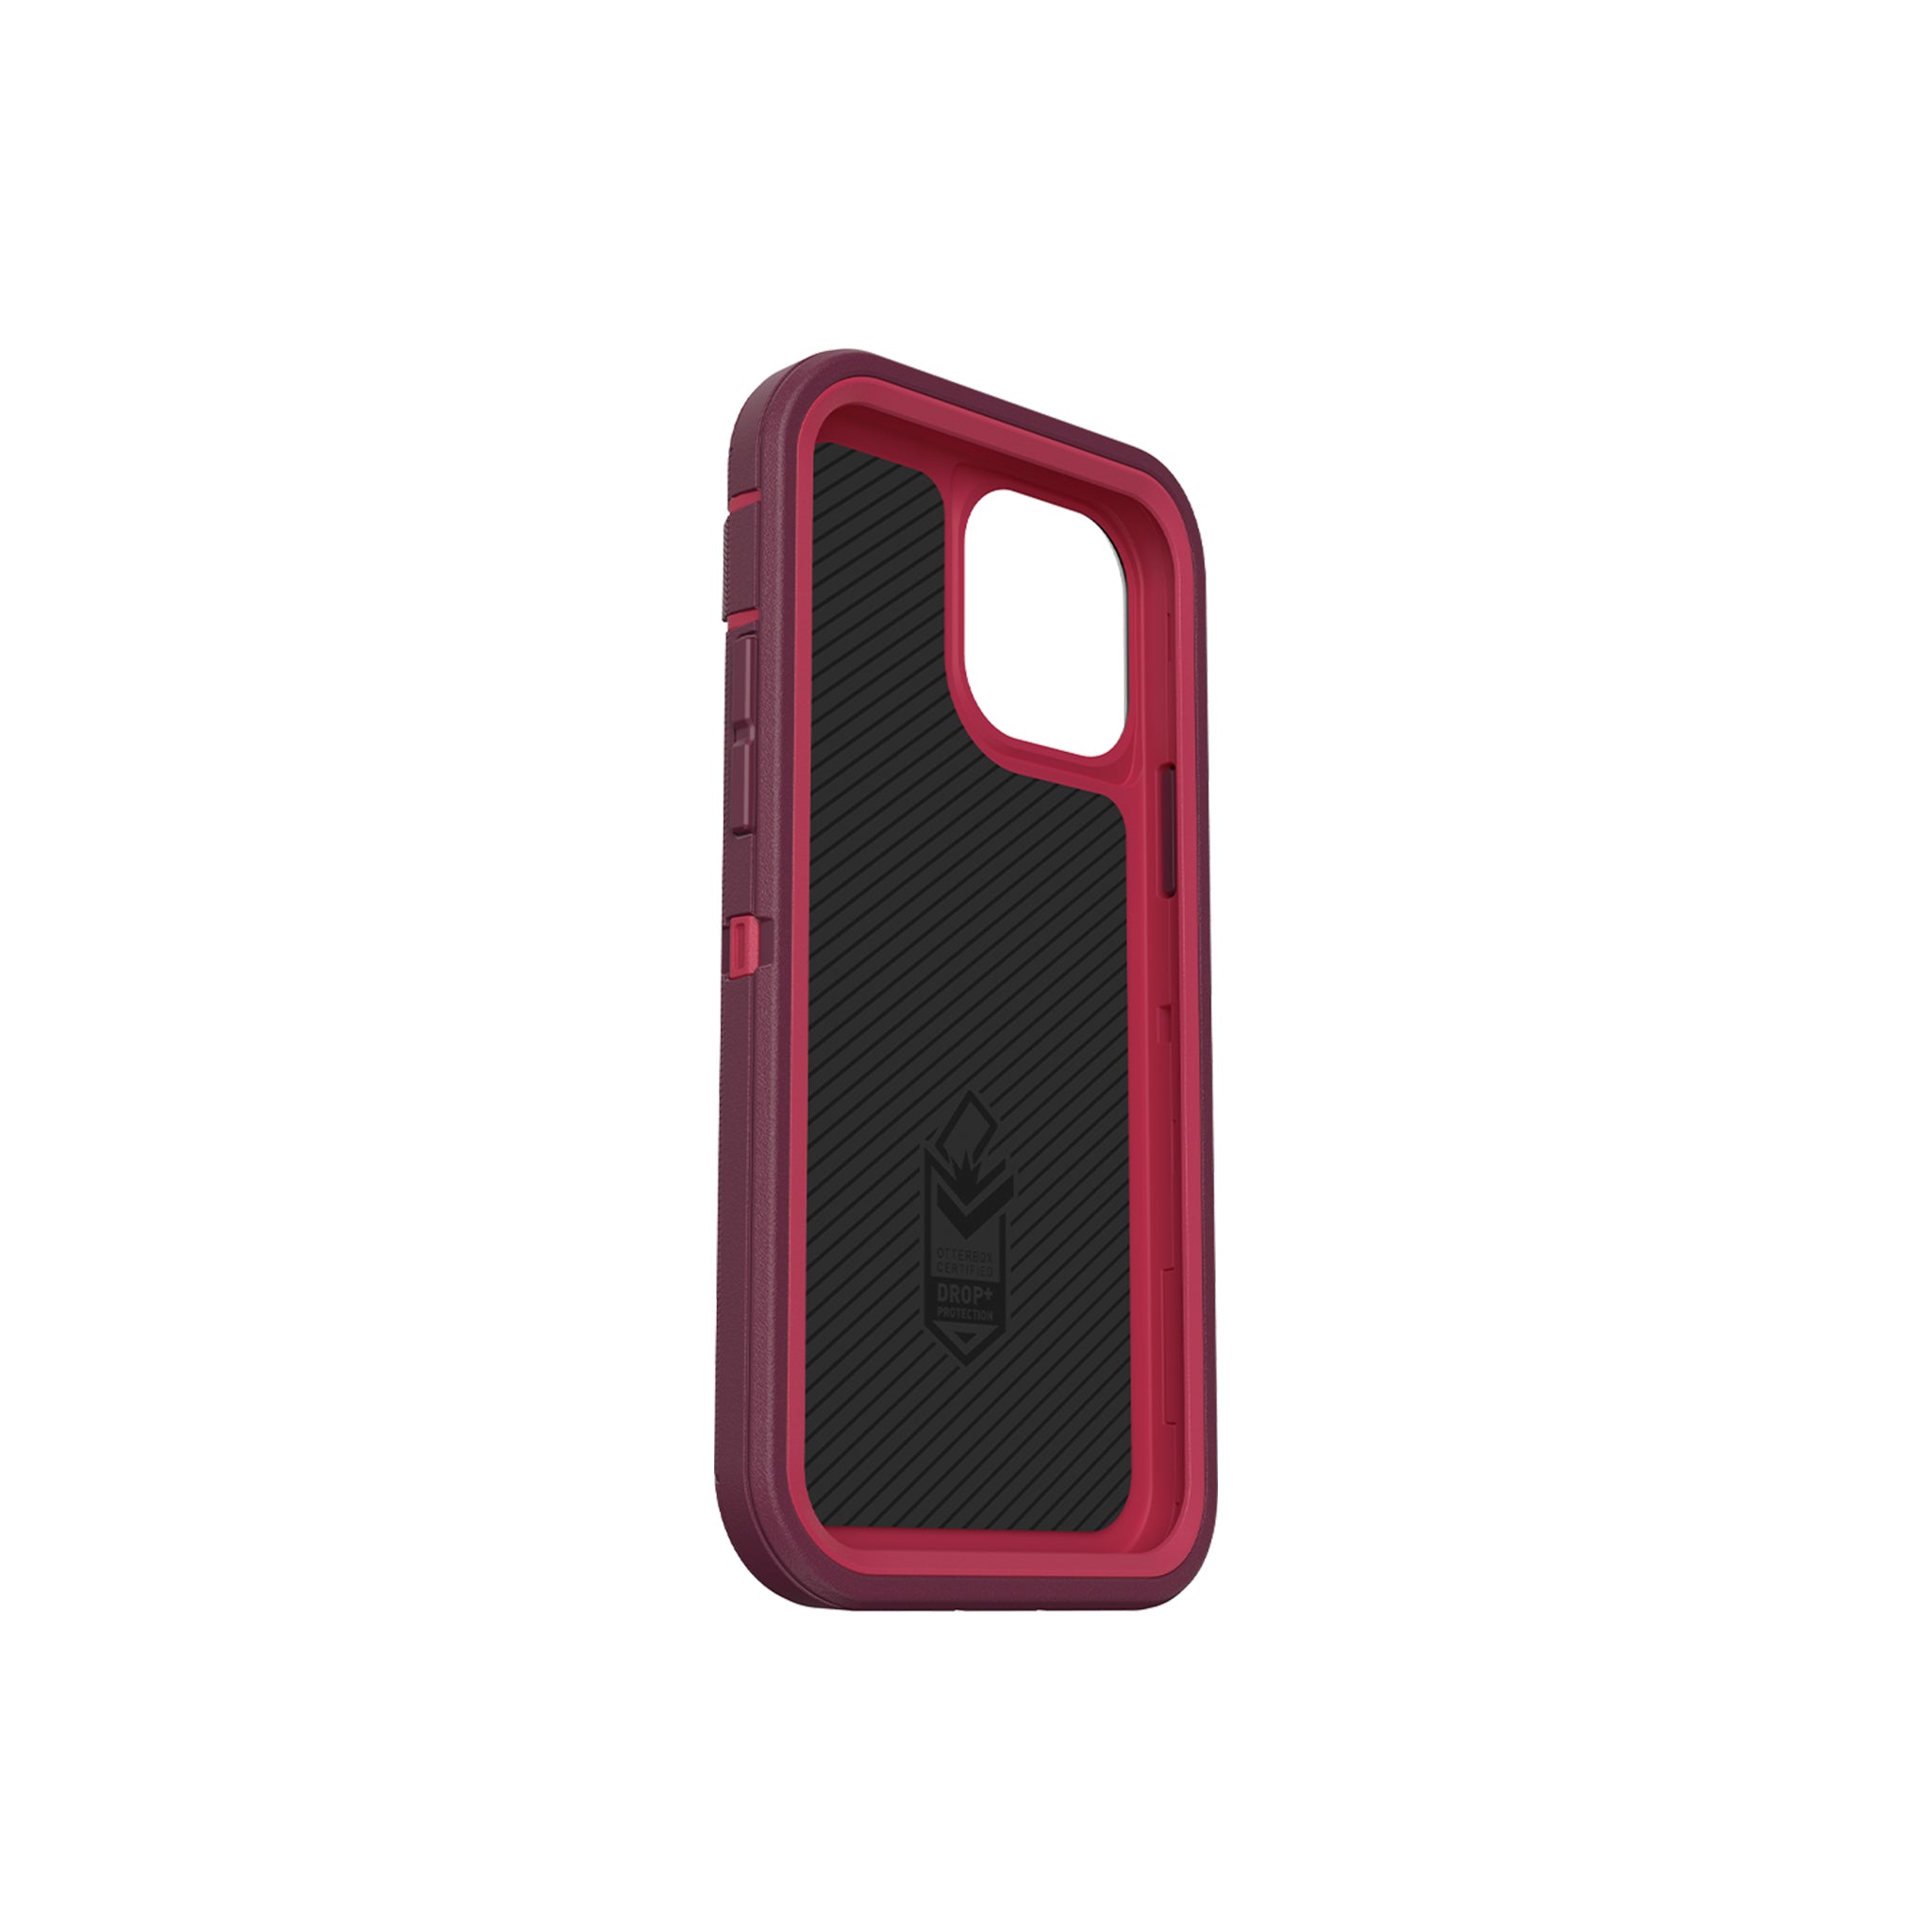 OtterBox - Defender fo iPhone 12 / 12 Pro - Berry Potion